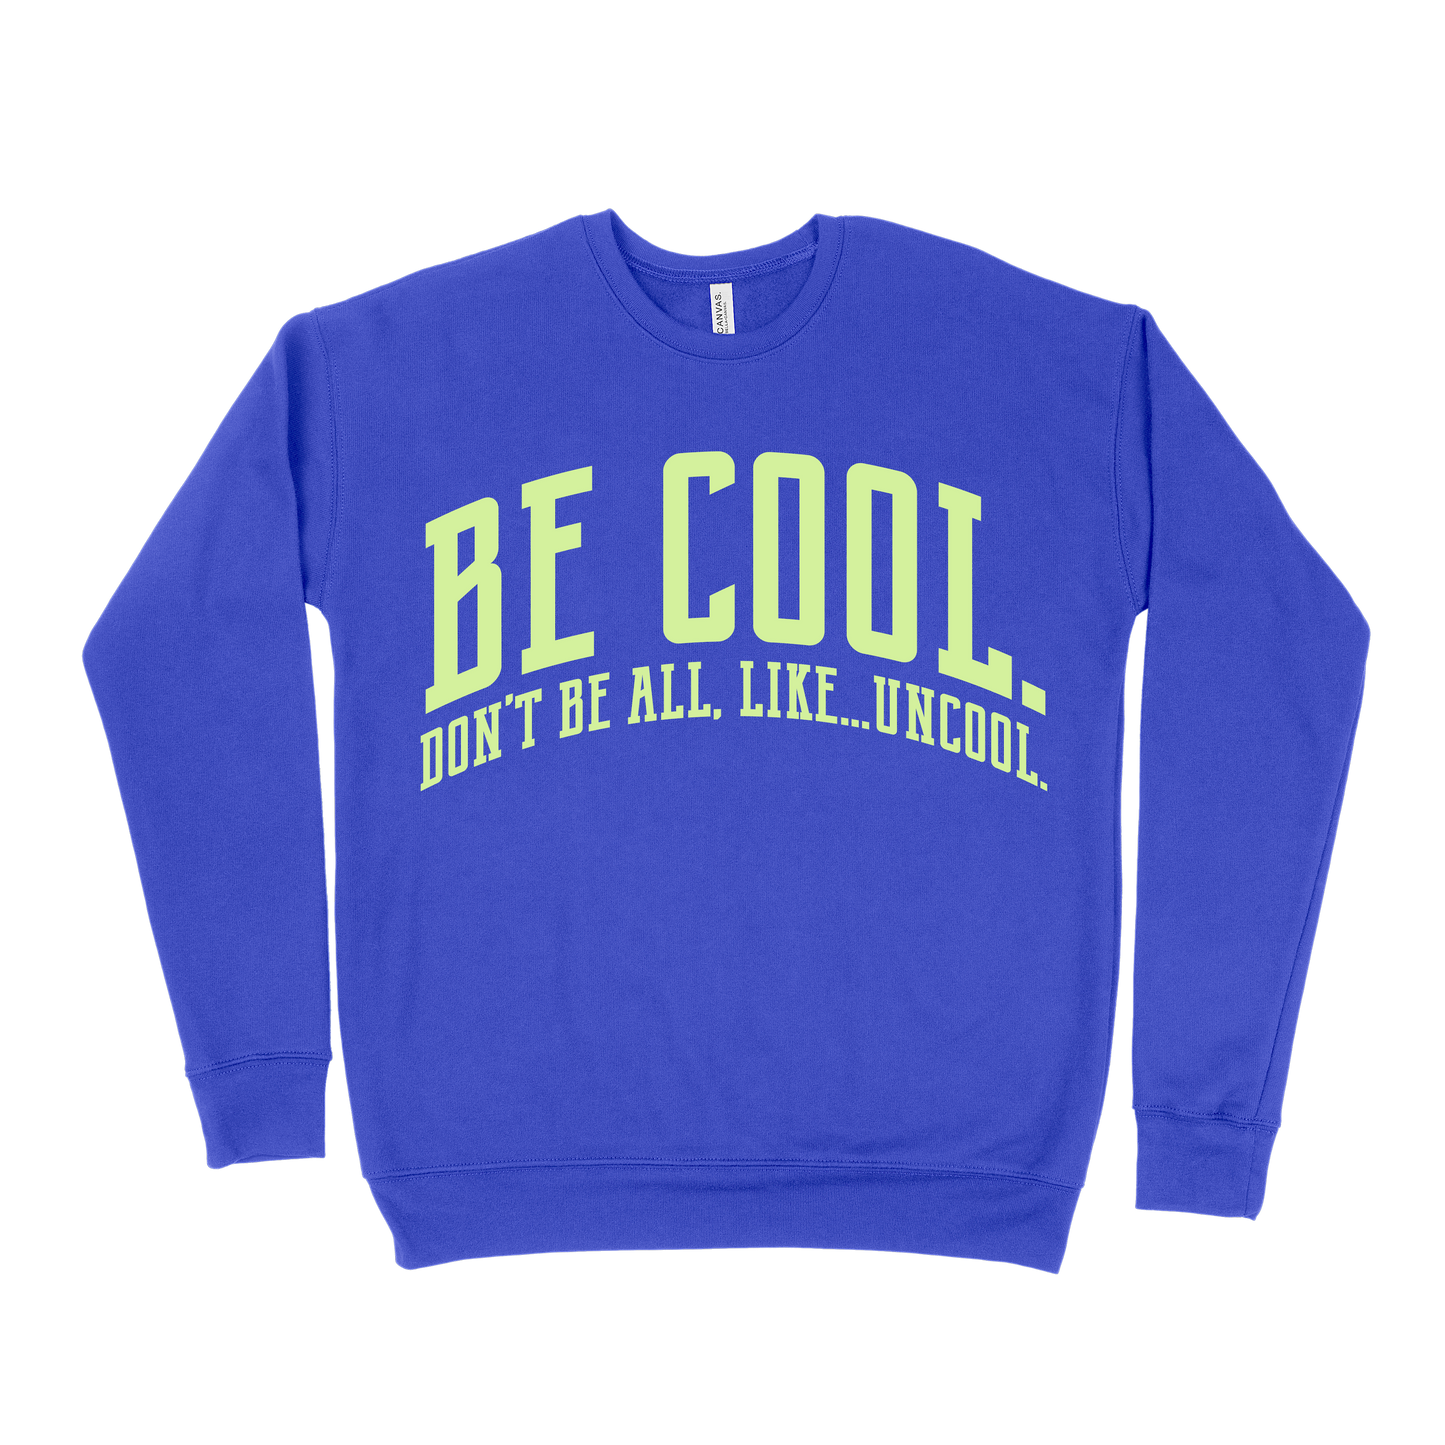 Be Cool. Don't Be All, Like...Uncool Sweatshirt - Royal Blue